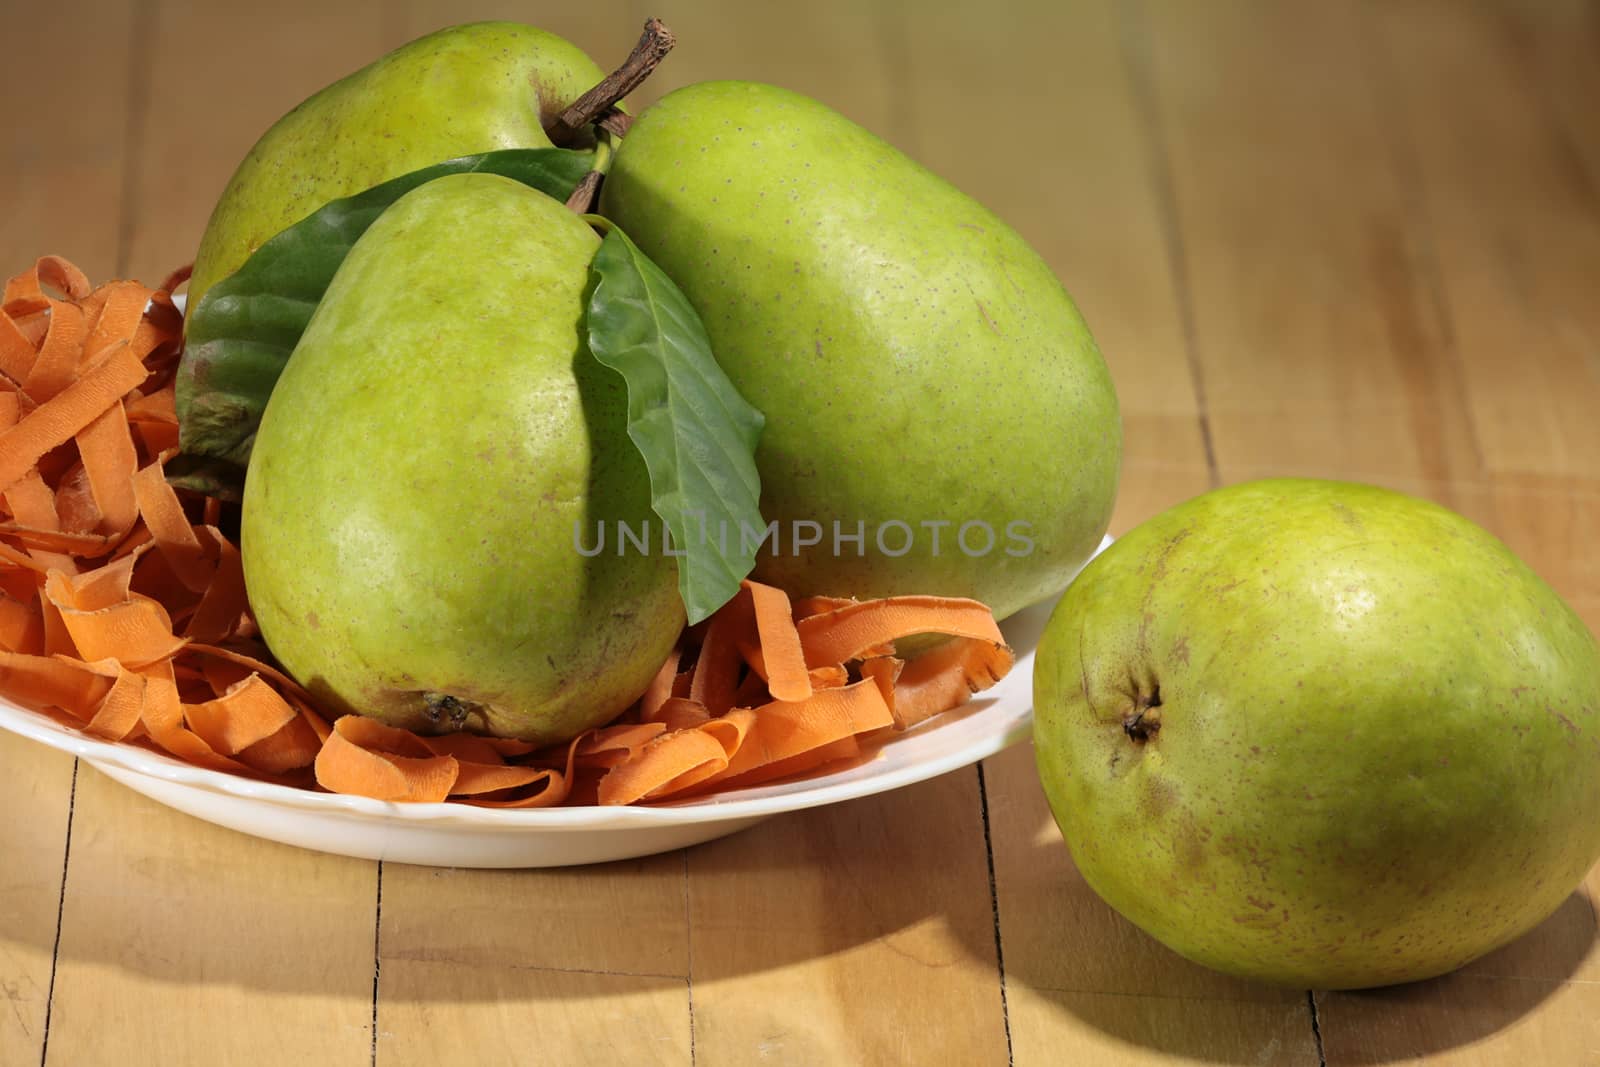 large ripe pears in the plate on the table